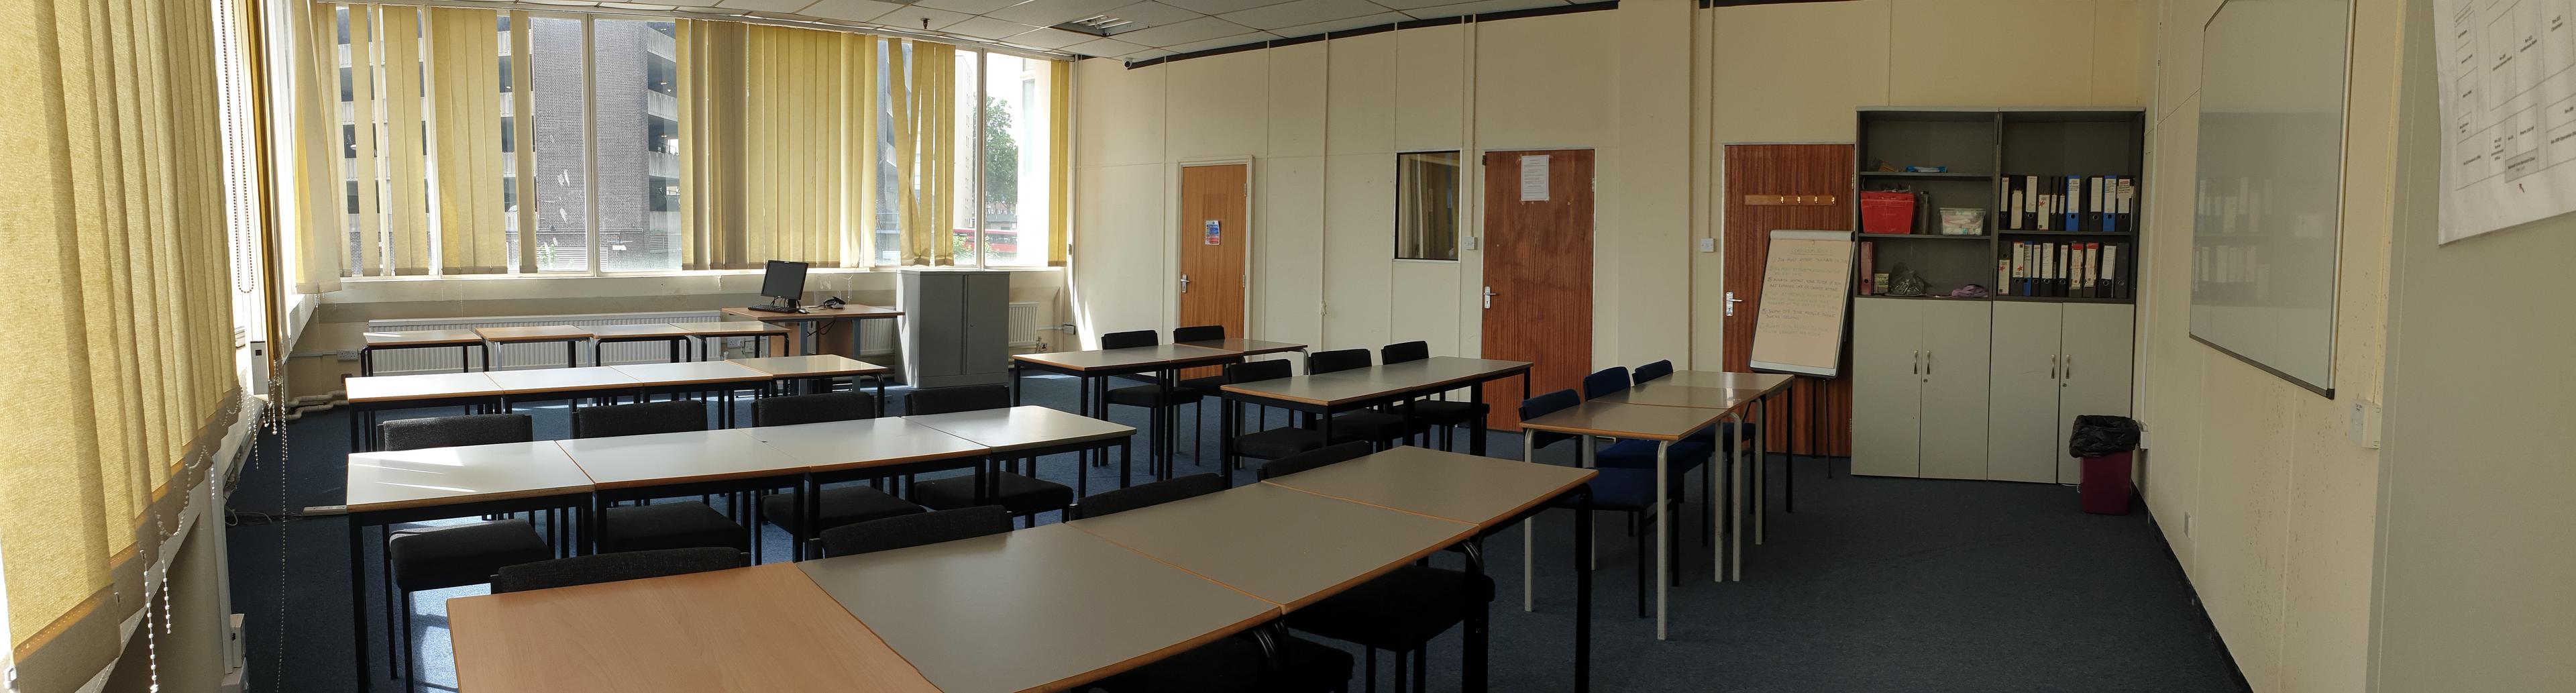 Classroom, The Woolwich College photo #1